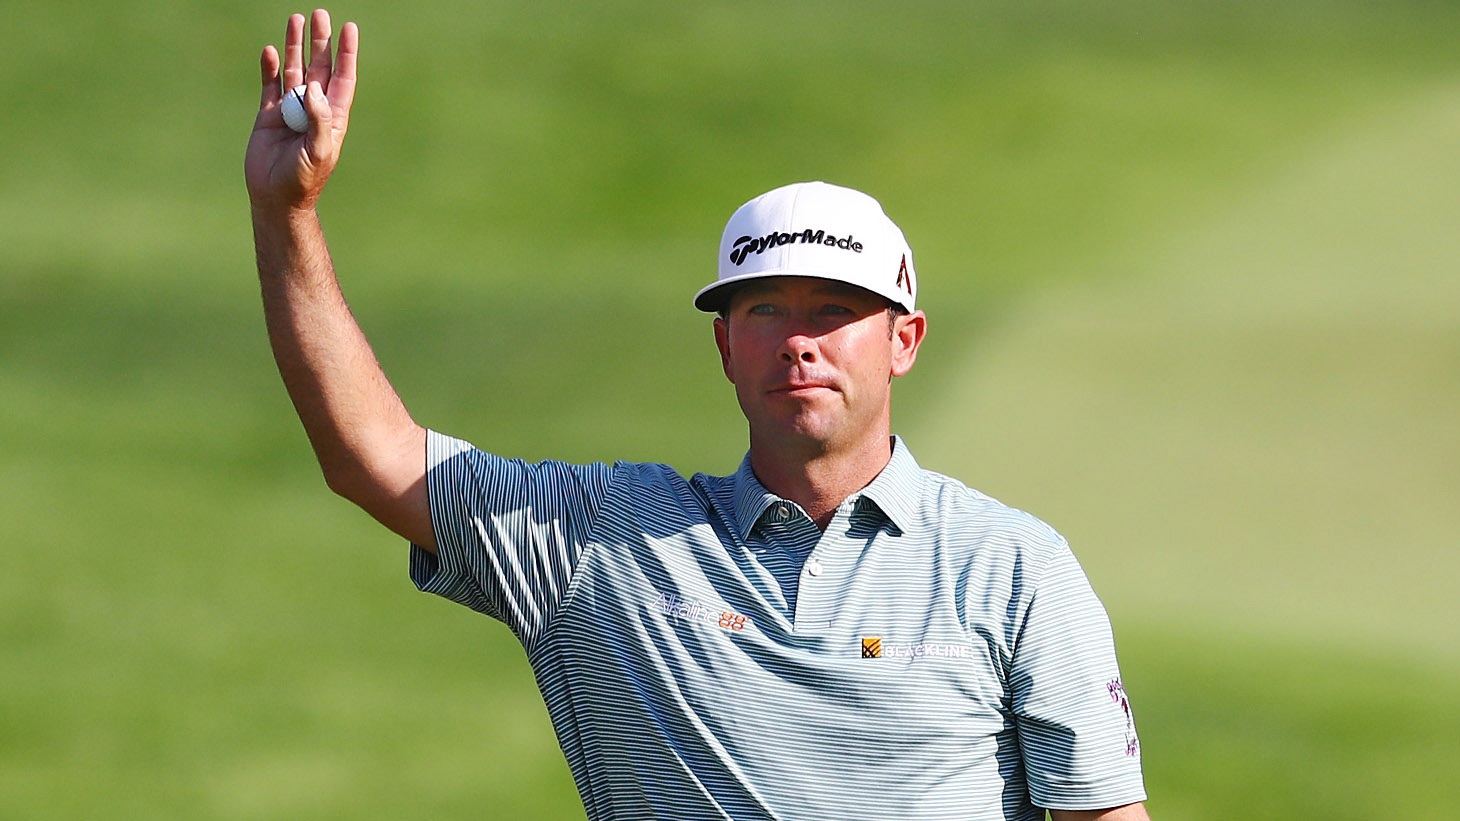 Chez Reavie rasies his Pro V1 golf ball in triumph after winning the 2019 Travelers Championship